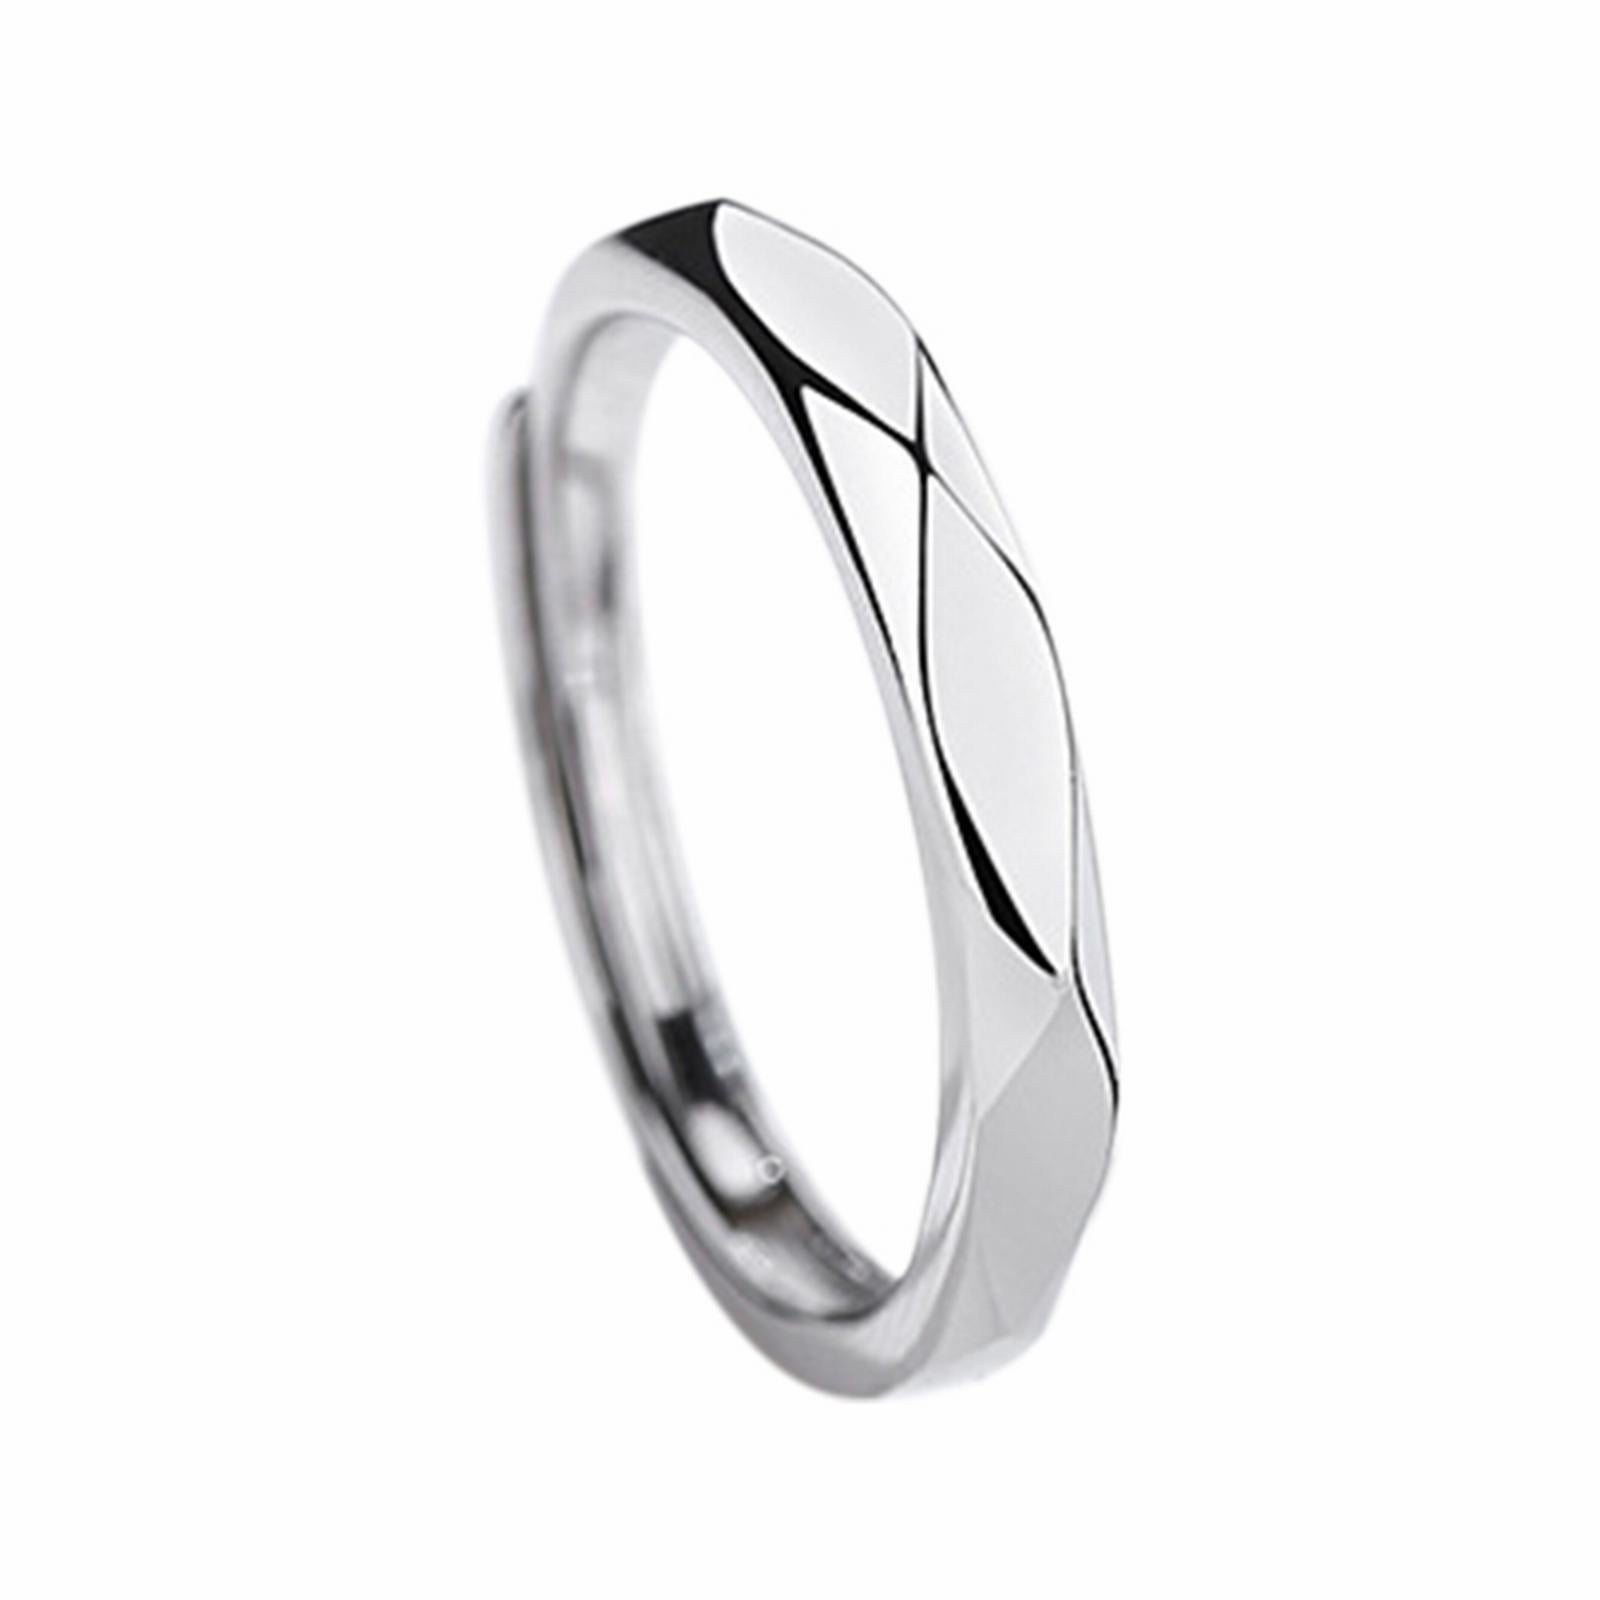 Frehsky rings 925 Sterling Italian Silver Lover Adjustable Ring For Couple Set Black And Men Women A Simple Light Love Lovers 488262e4 1340 4a6b b942 6b5fc2e268ff.a694561234ee39fceb78a577f6fb66a4